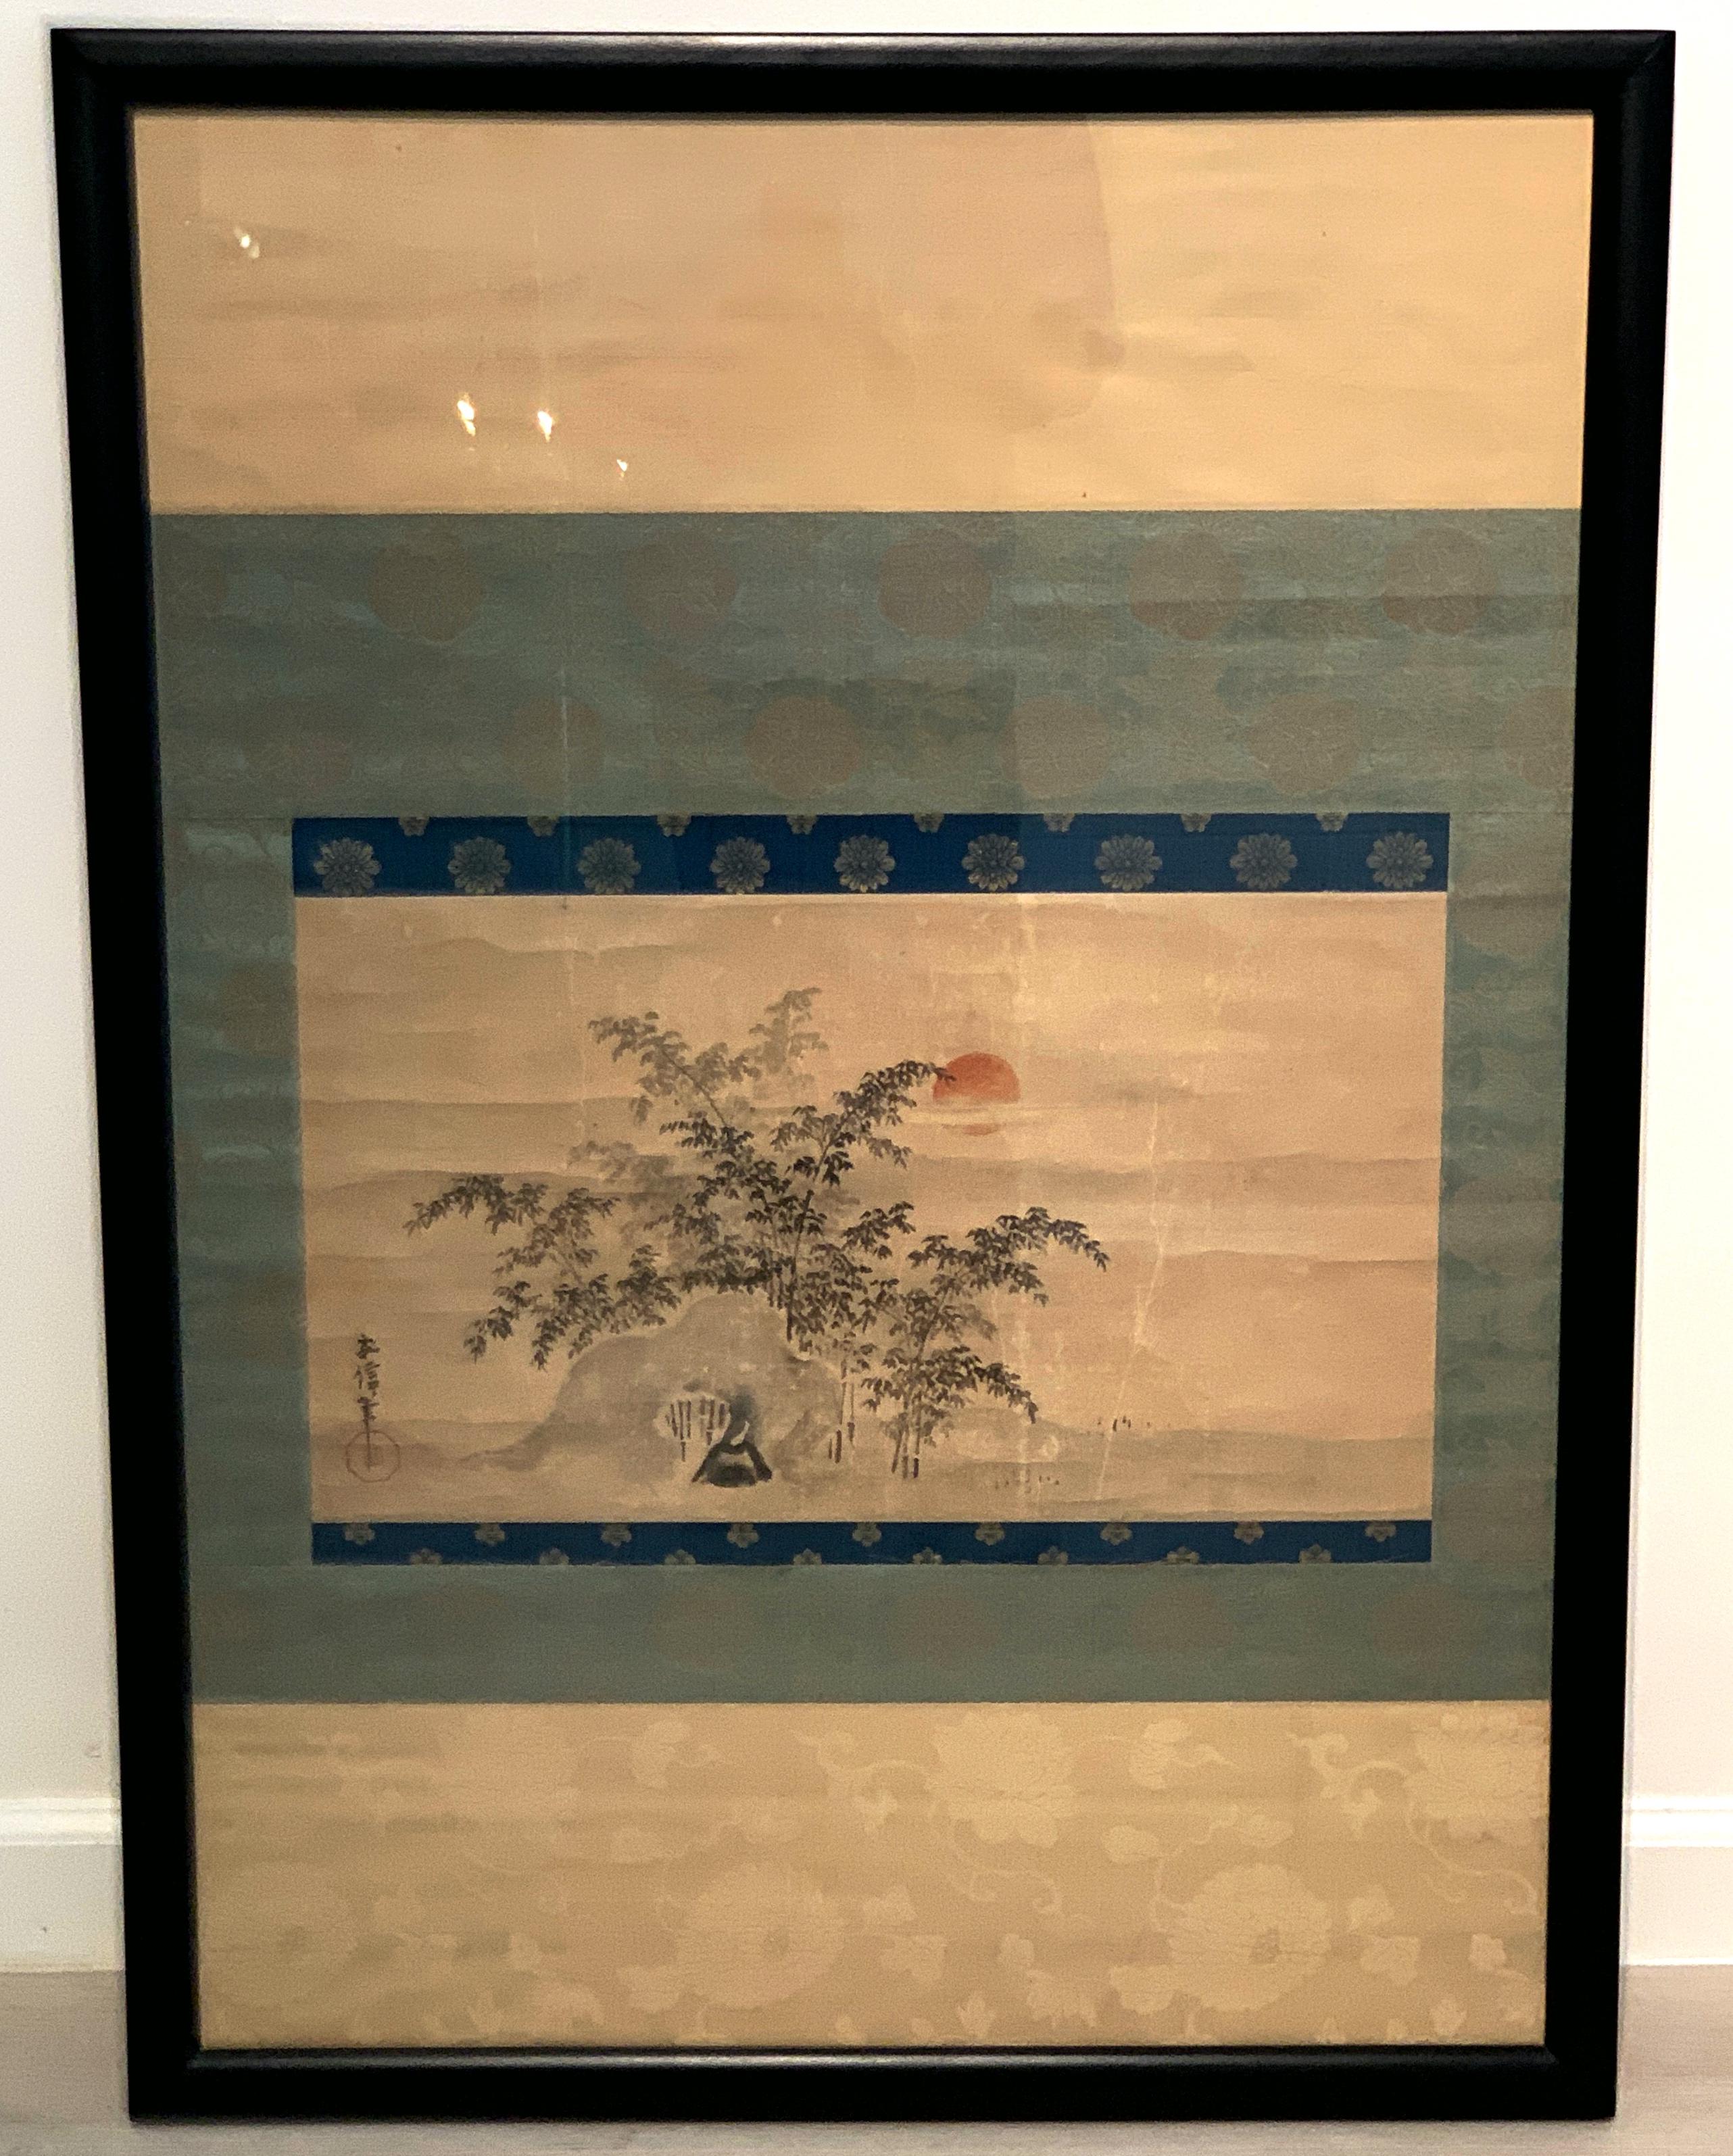 A charming Japanese sumi-e ink and color scroll painting, mounted, framed and glazed, signed Yasunobu, late Edo or early Meiji Period, mid-19th century.

The scroll painting depicting a stand of soaring bamboo behind a natural rock formation. In